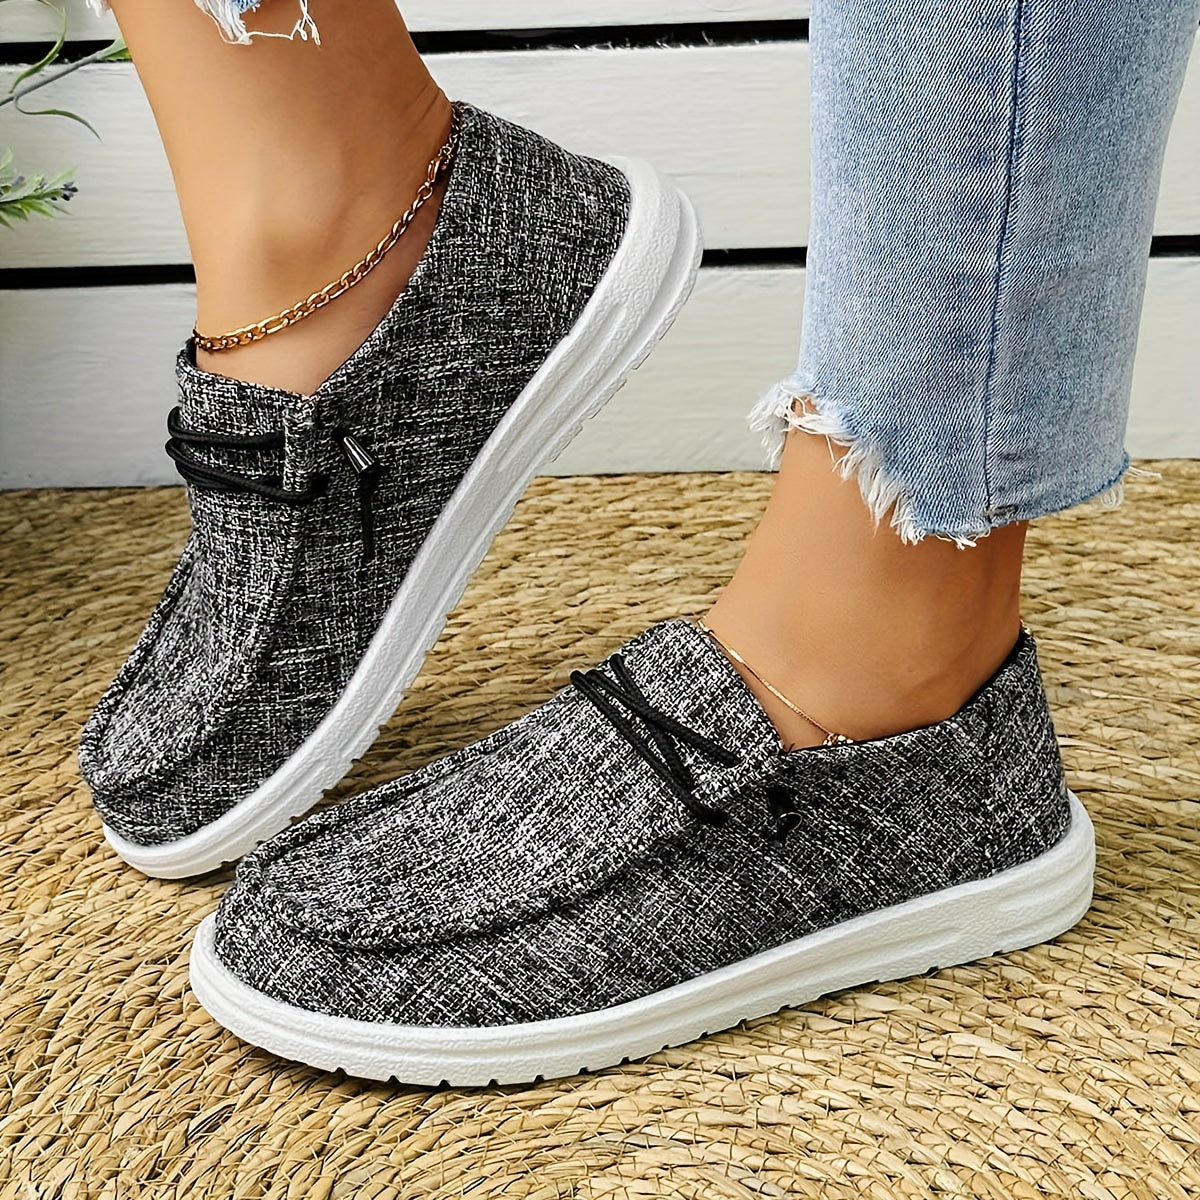 Women's Solid Color Canvas Shoes, Casual Lace Up Loafer Shoes, Lightweight Low Top Sneakers